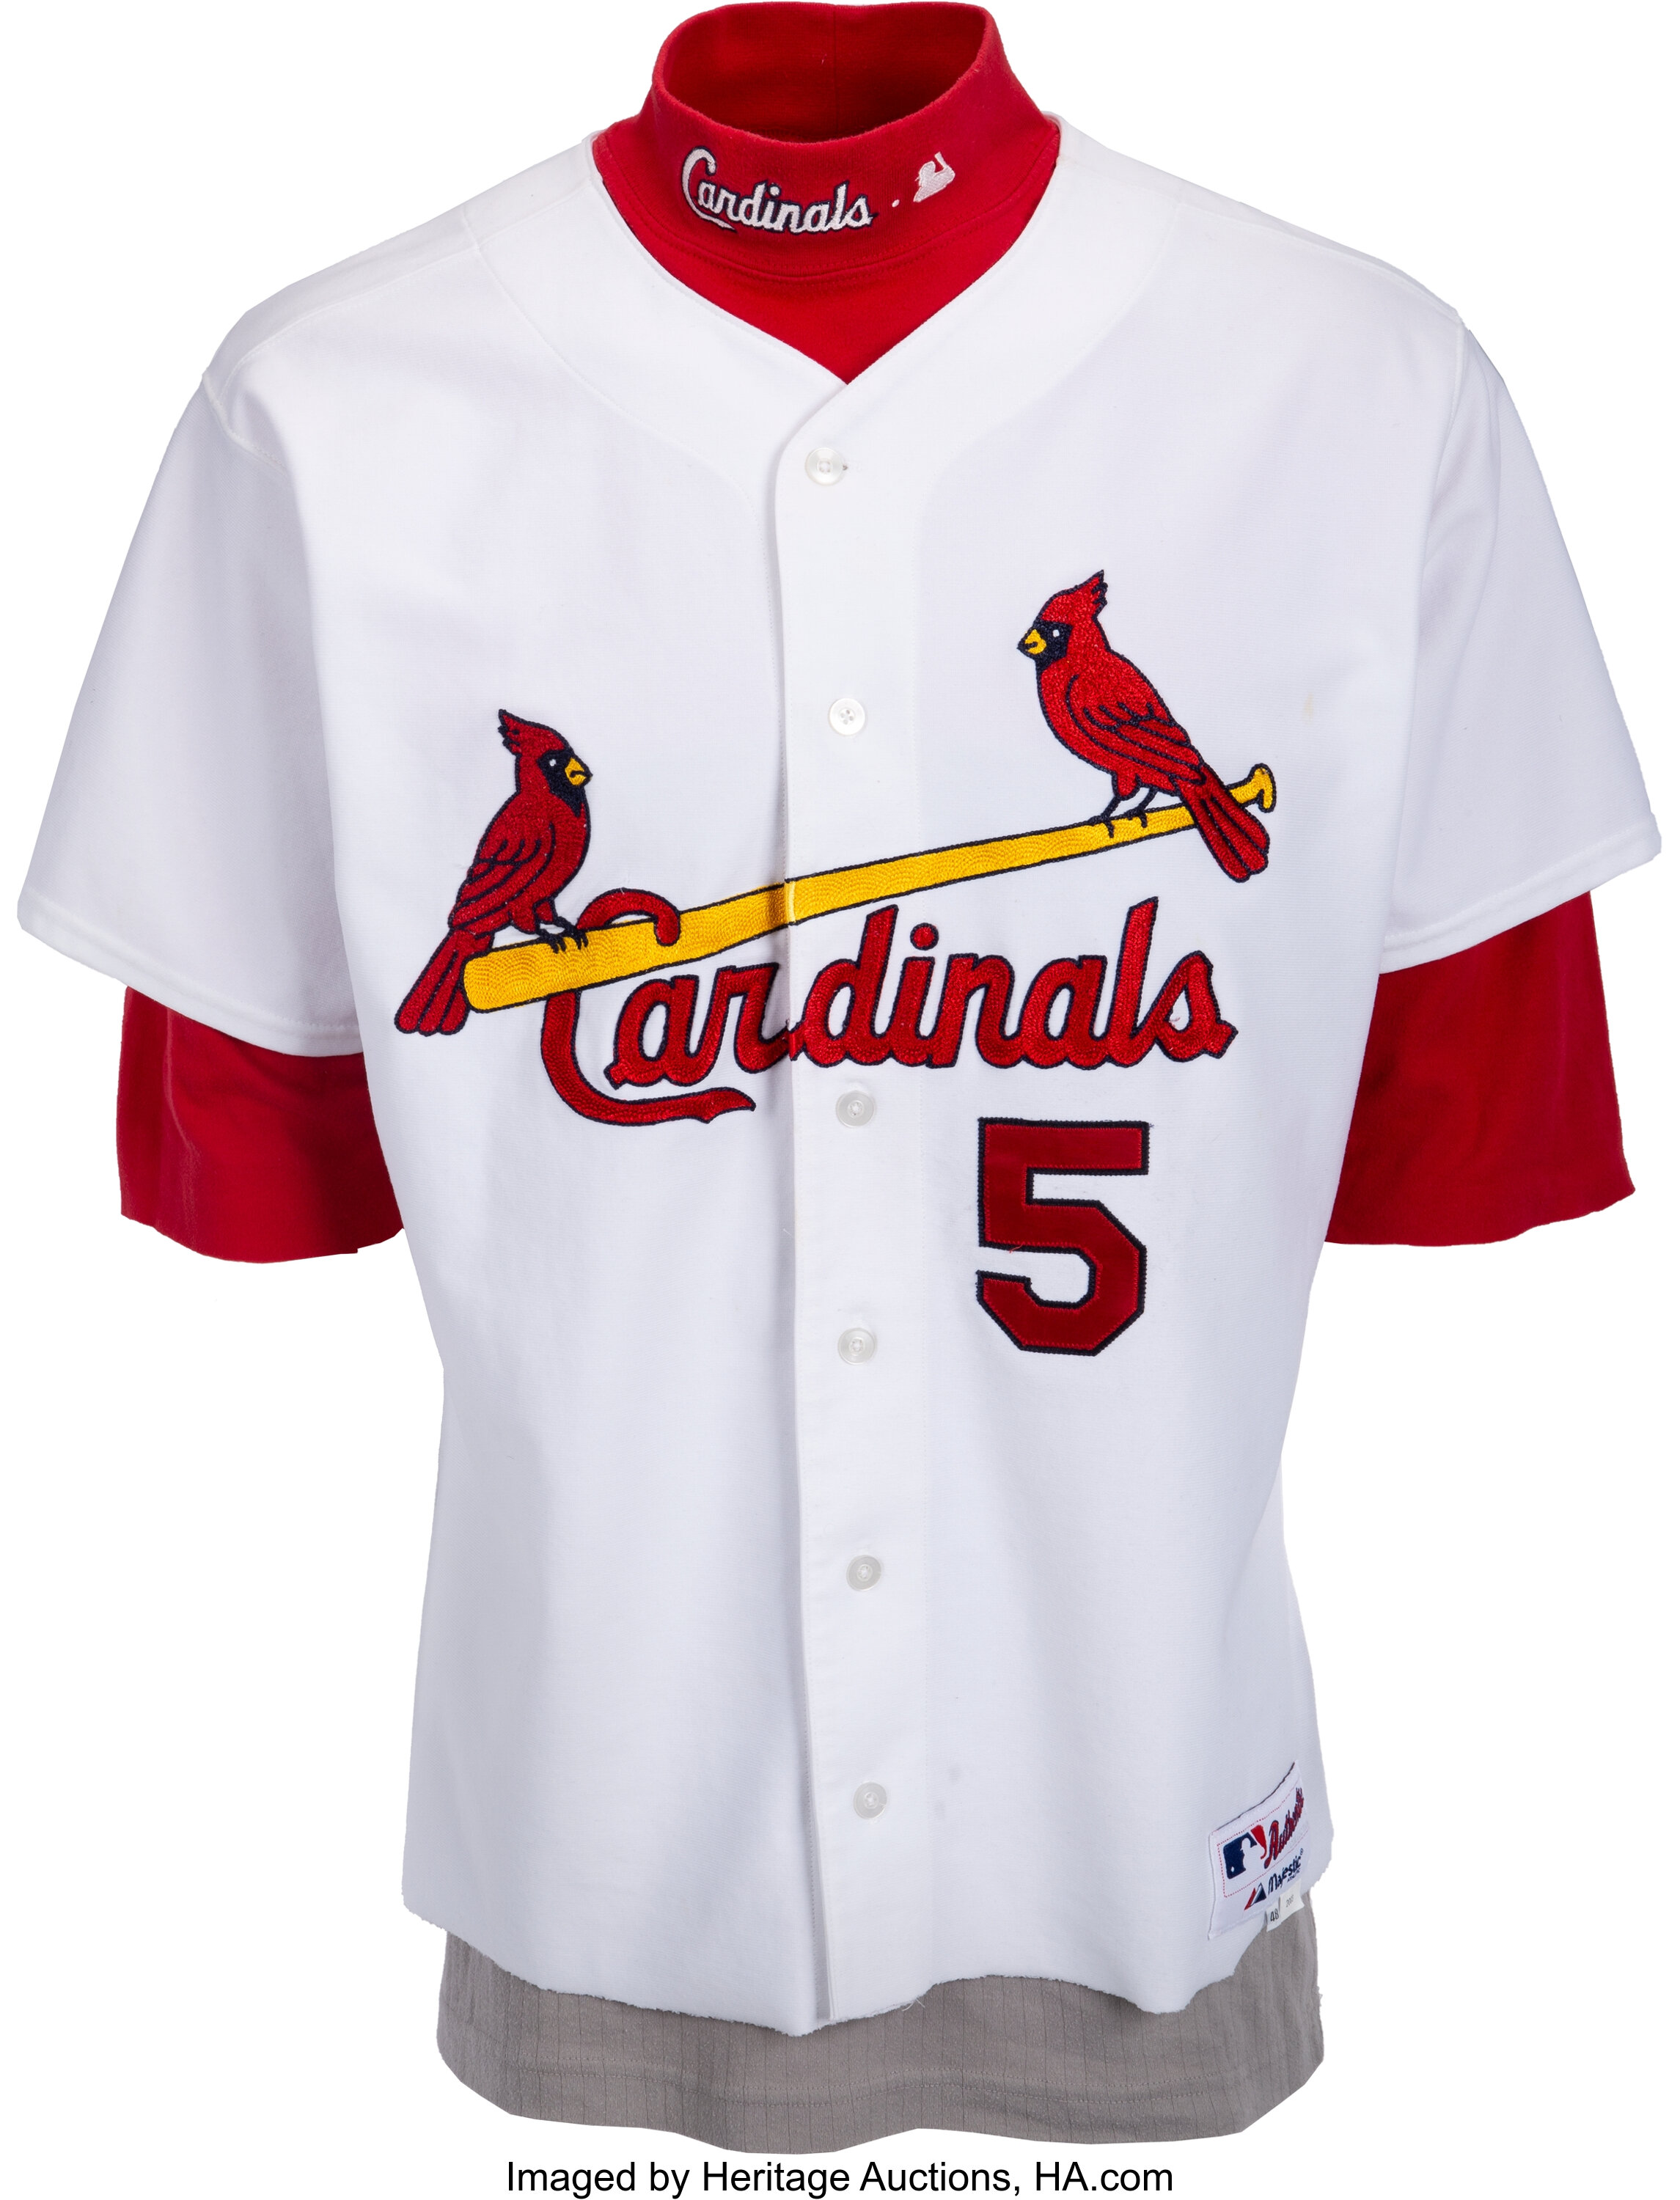 Albert Pujols Game-Used Jersey from the 9/25/20 Game vs. LAD